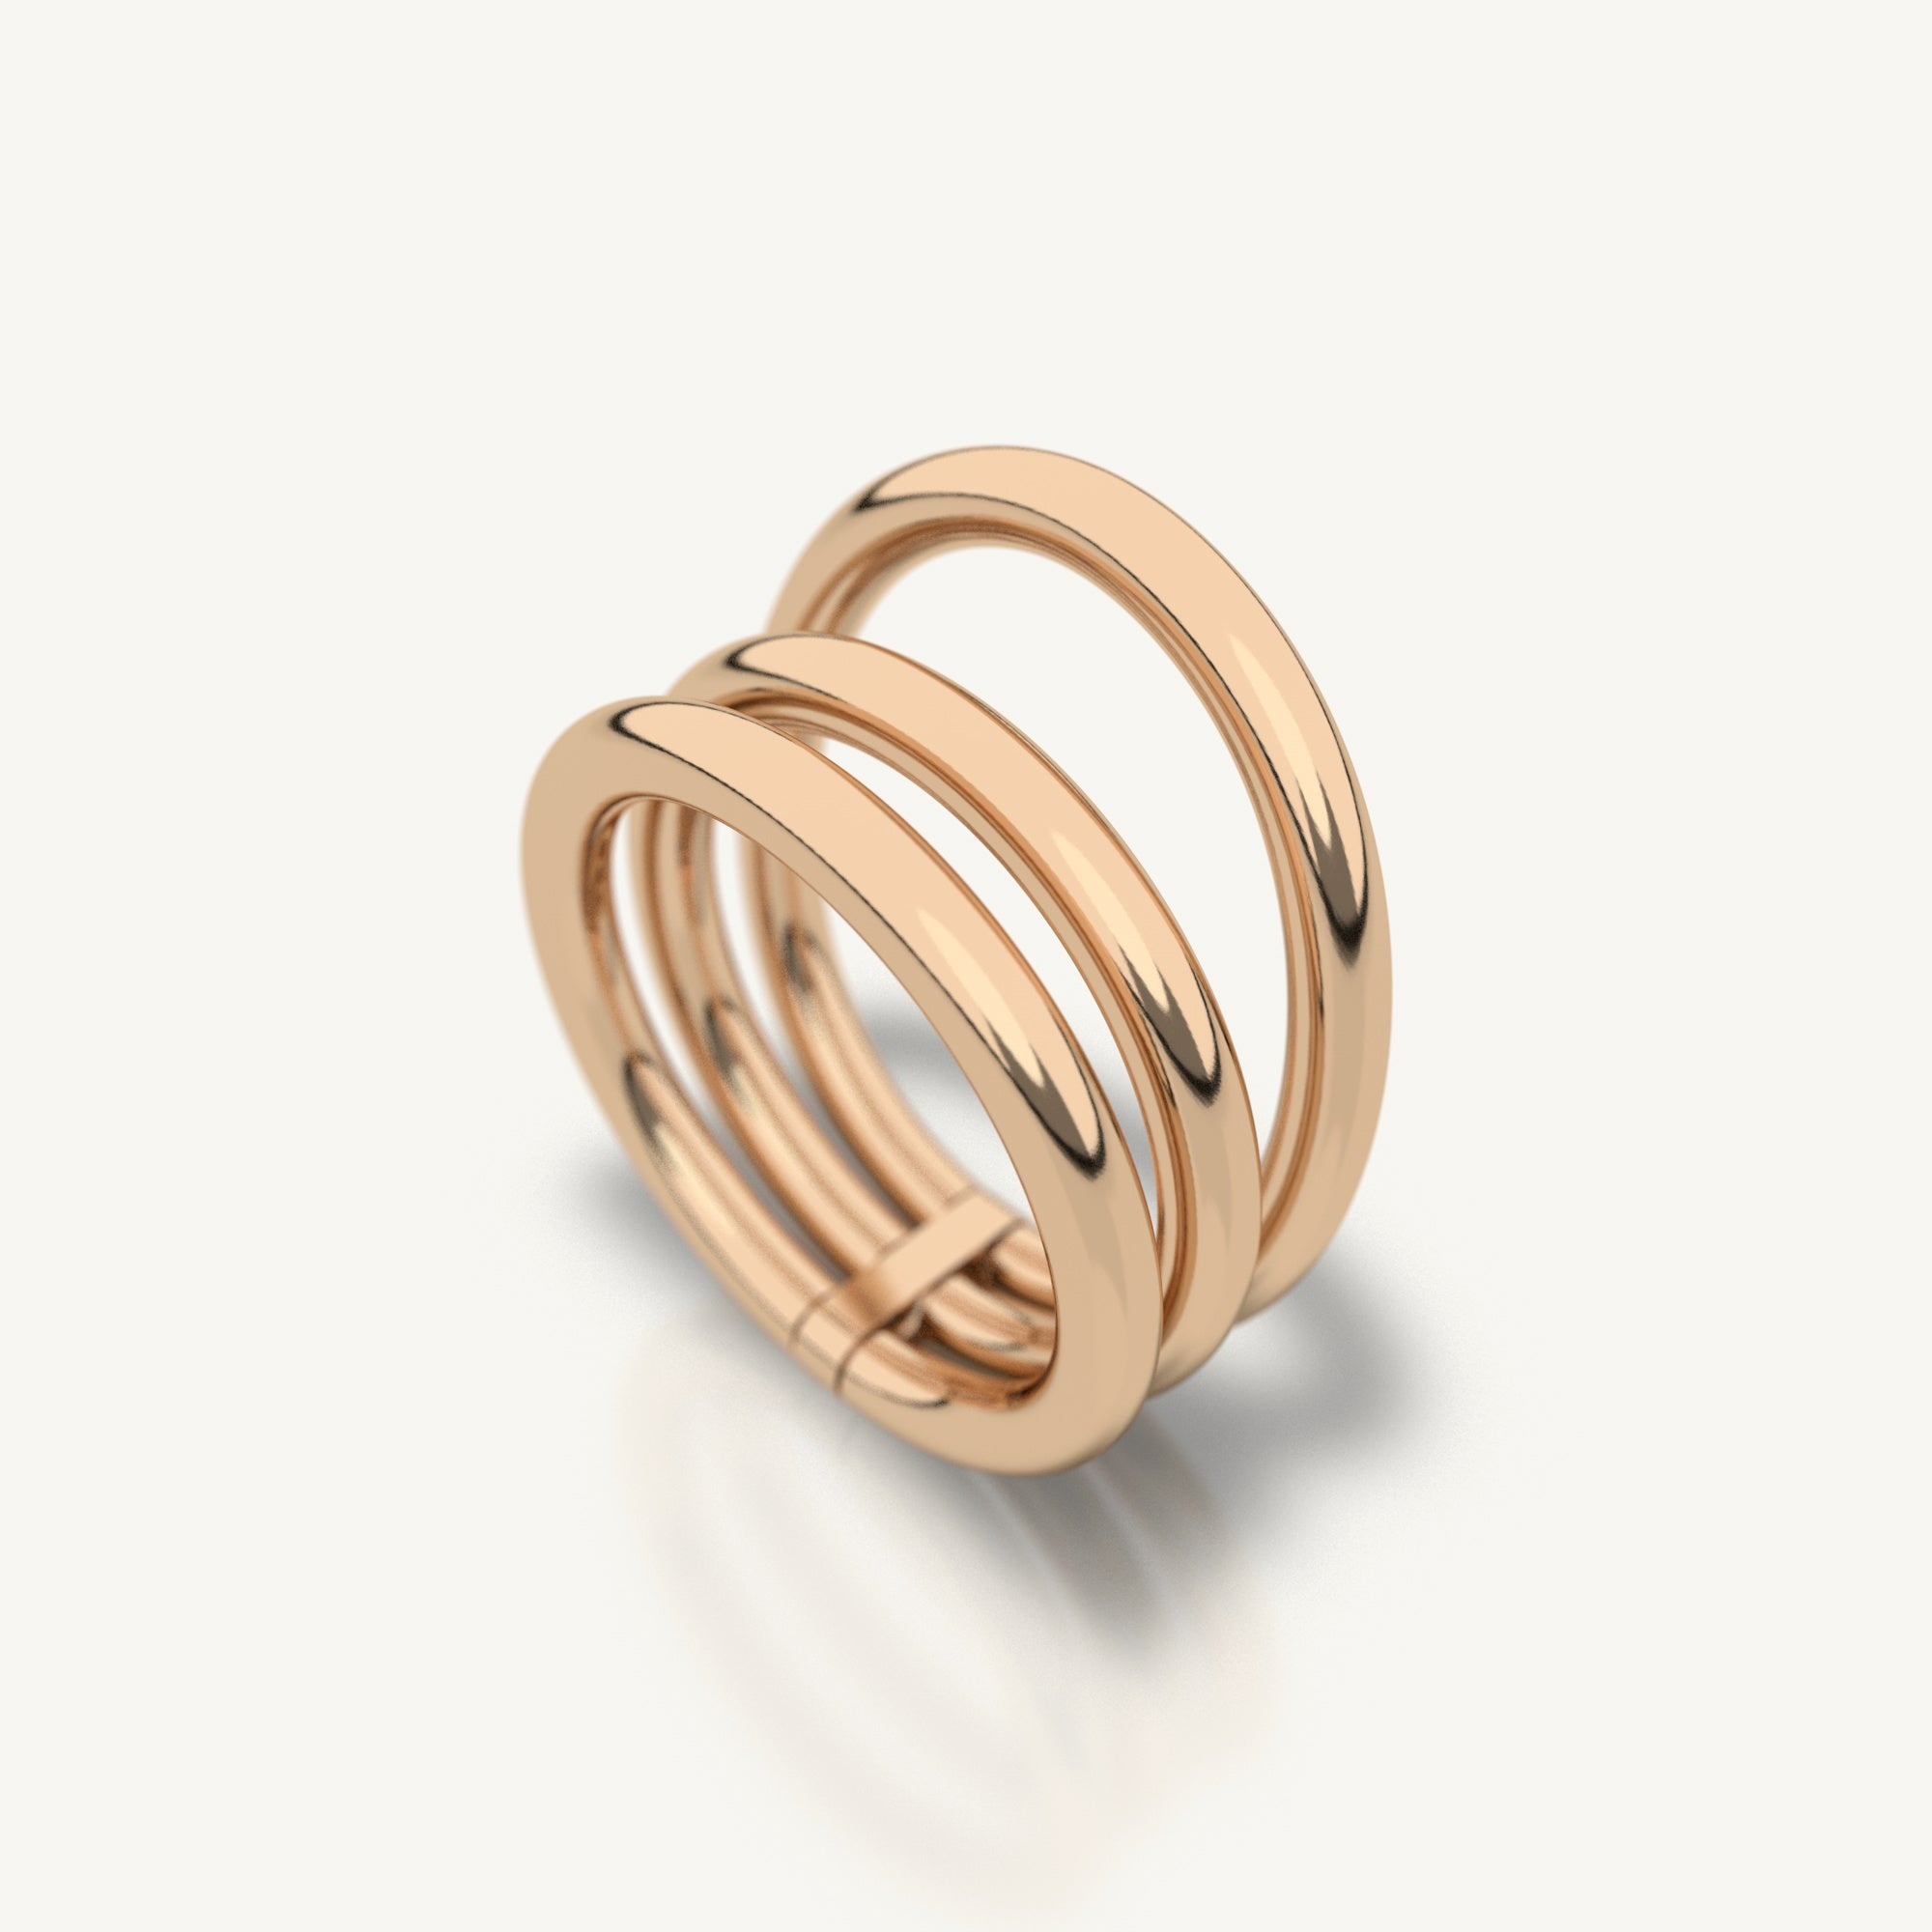 Trio ring from Inacio made from 18k recycled rose gold